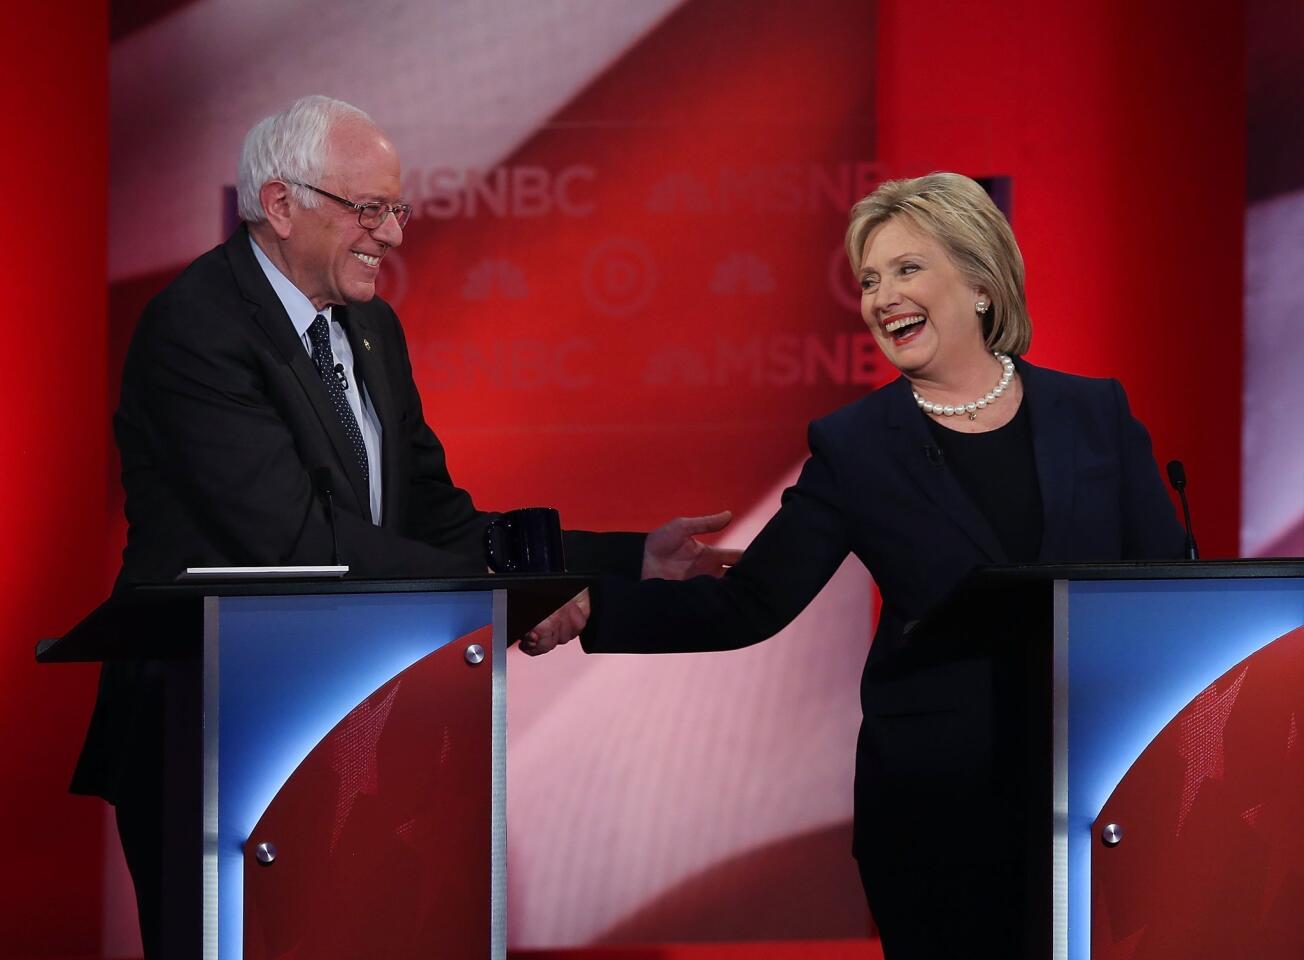 Bernie Sanders and Hillary Clinton shake hands after the debate.